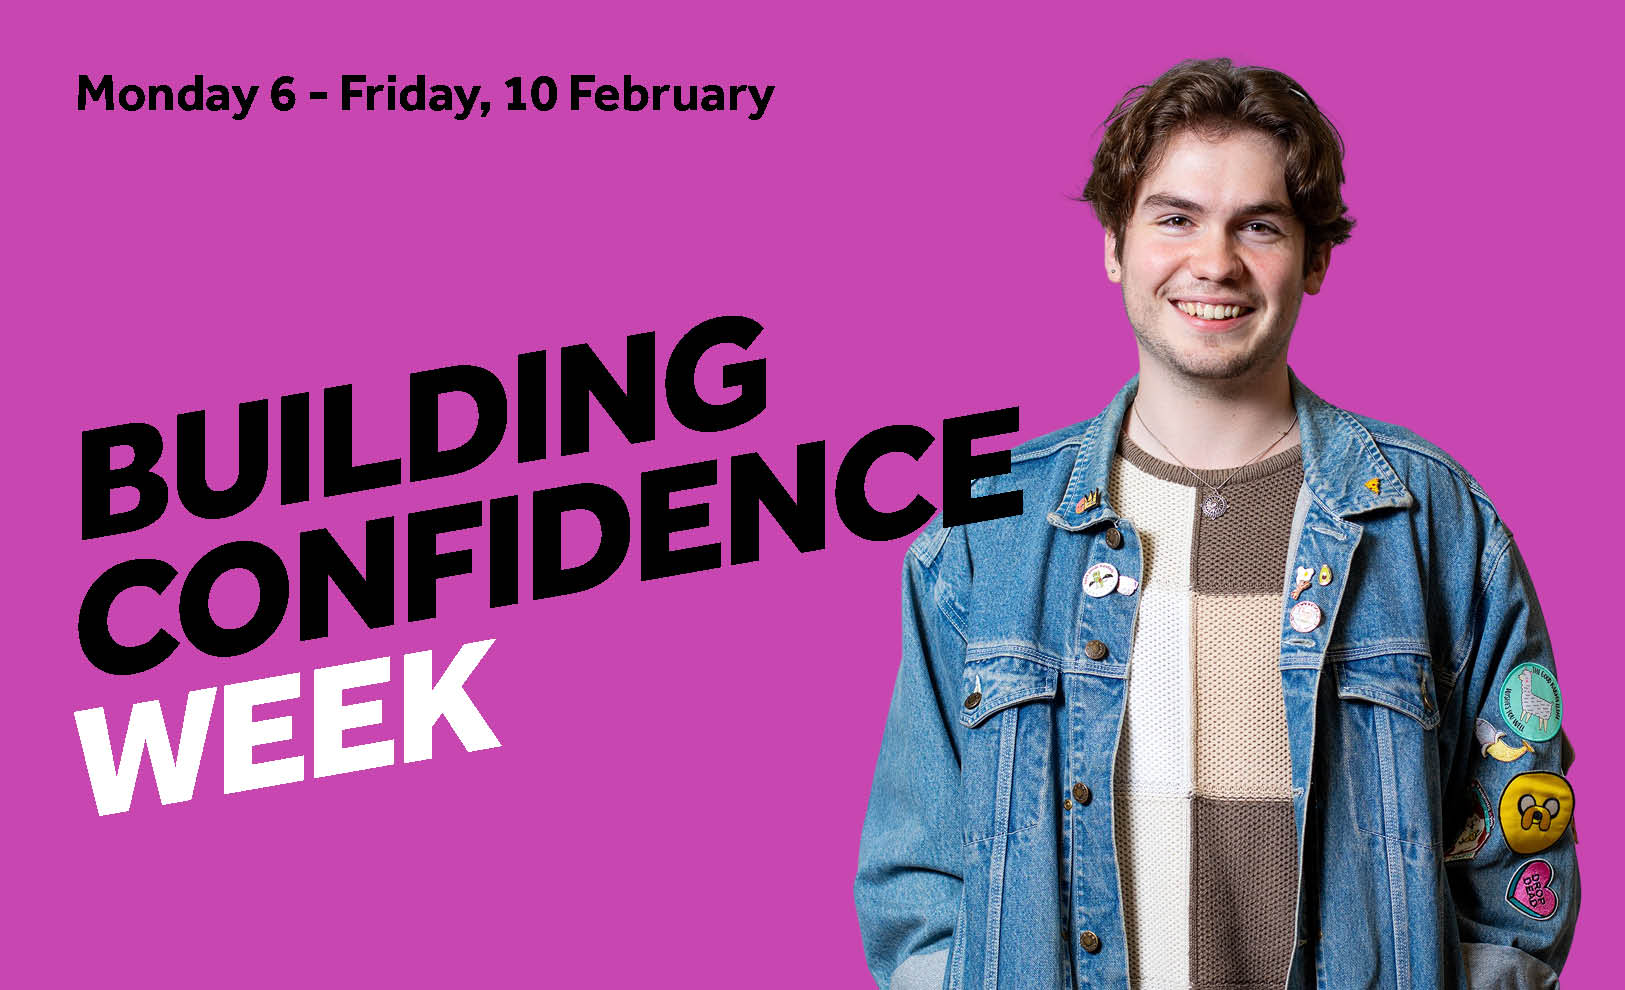 Text reads Monday 6 - Friday 10 February Buildinmg confidence week. Male student in a denim jacket and a jumper is smiling